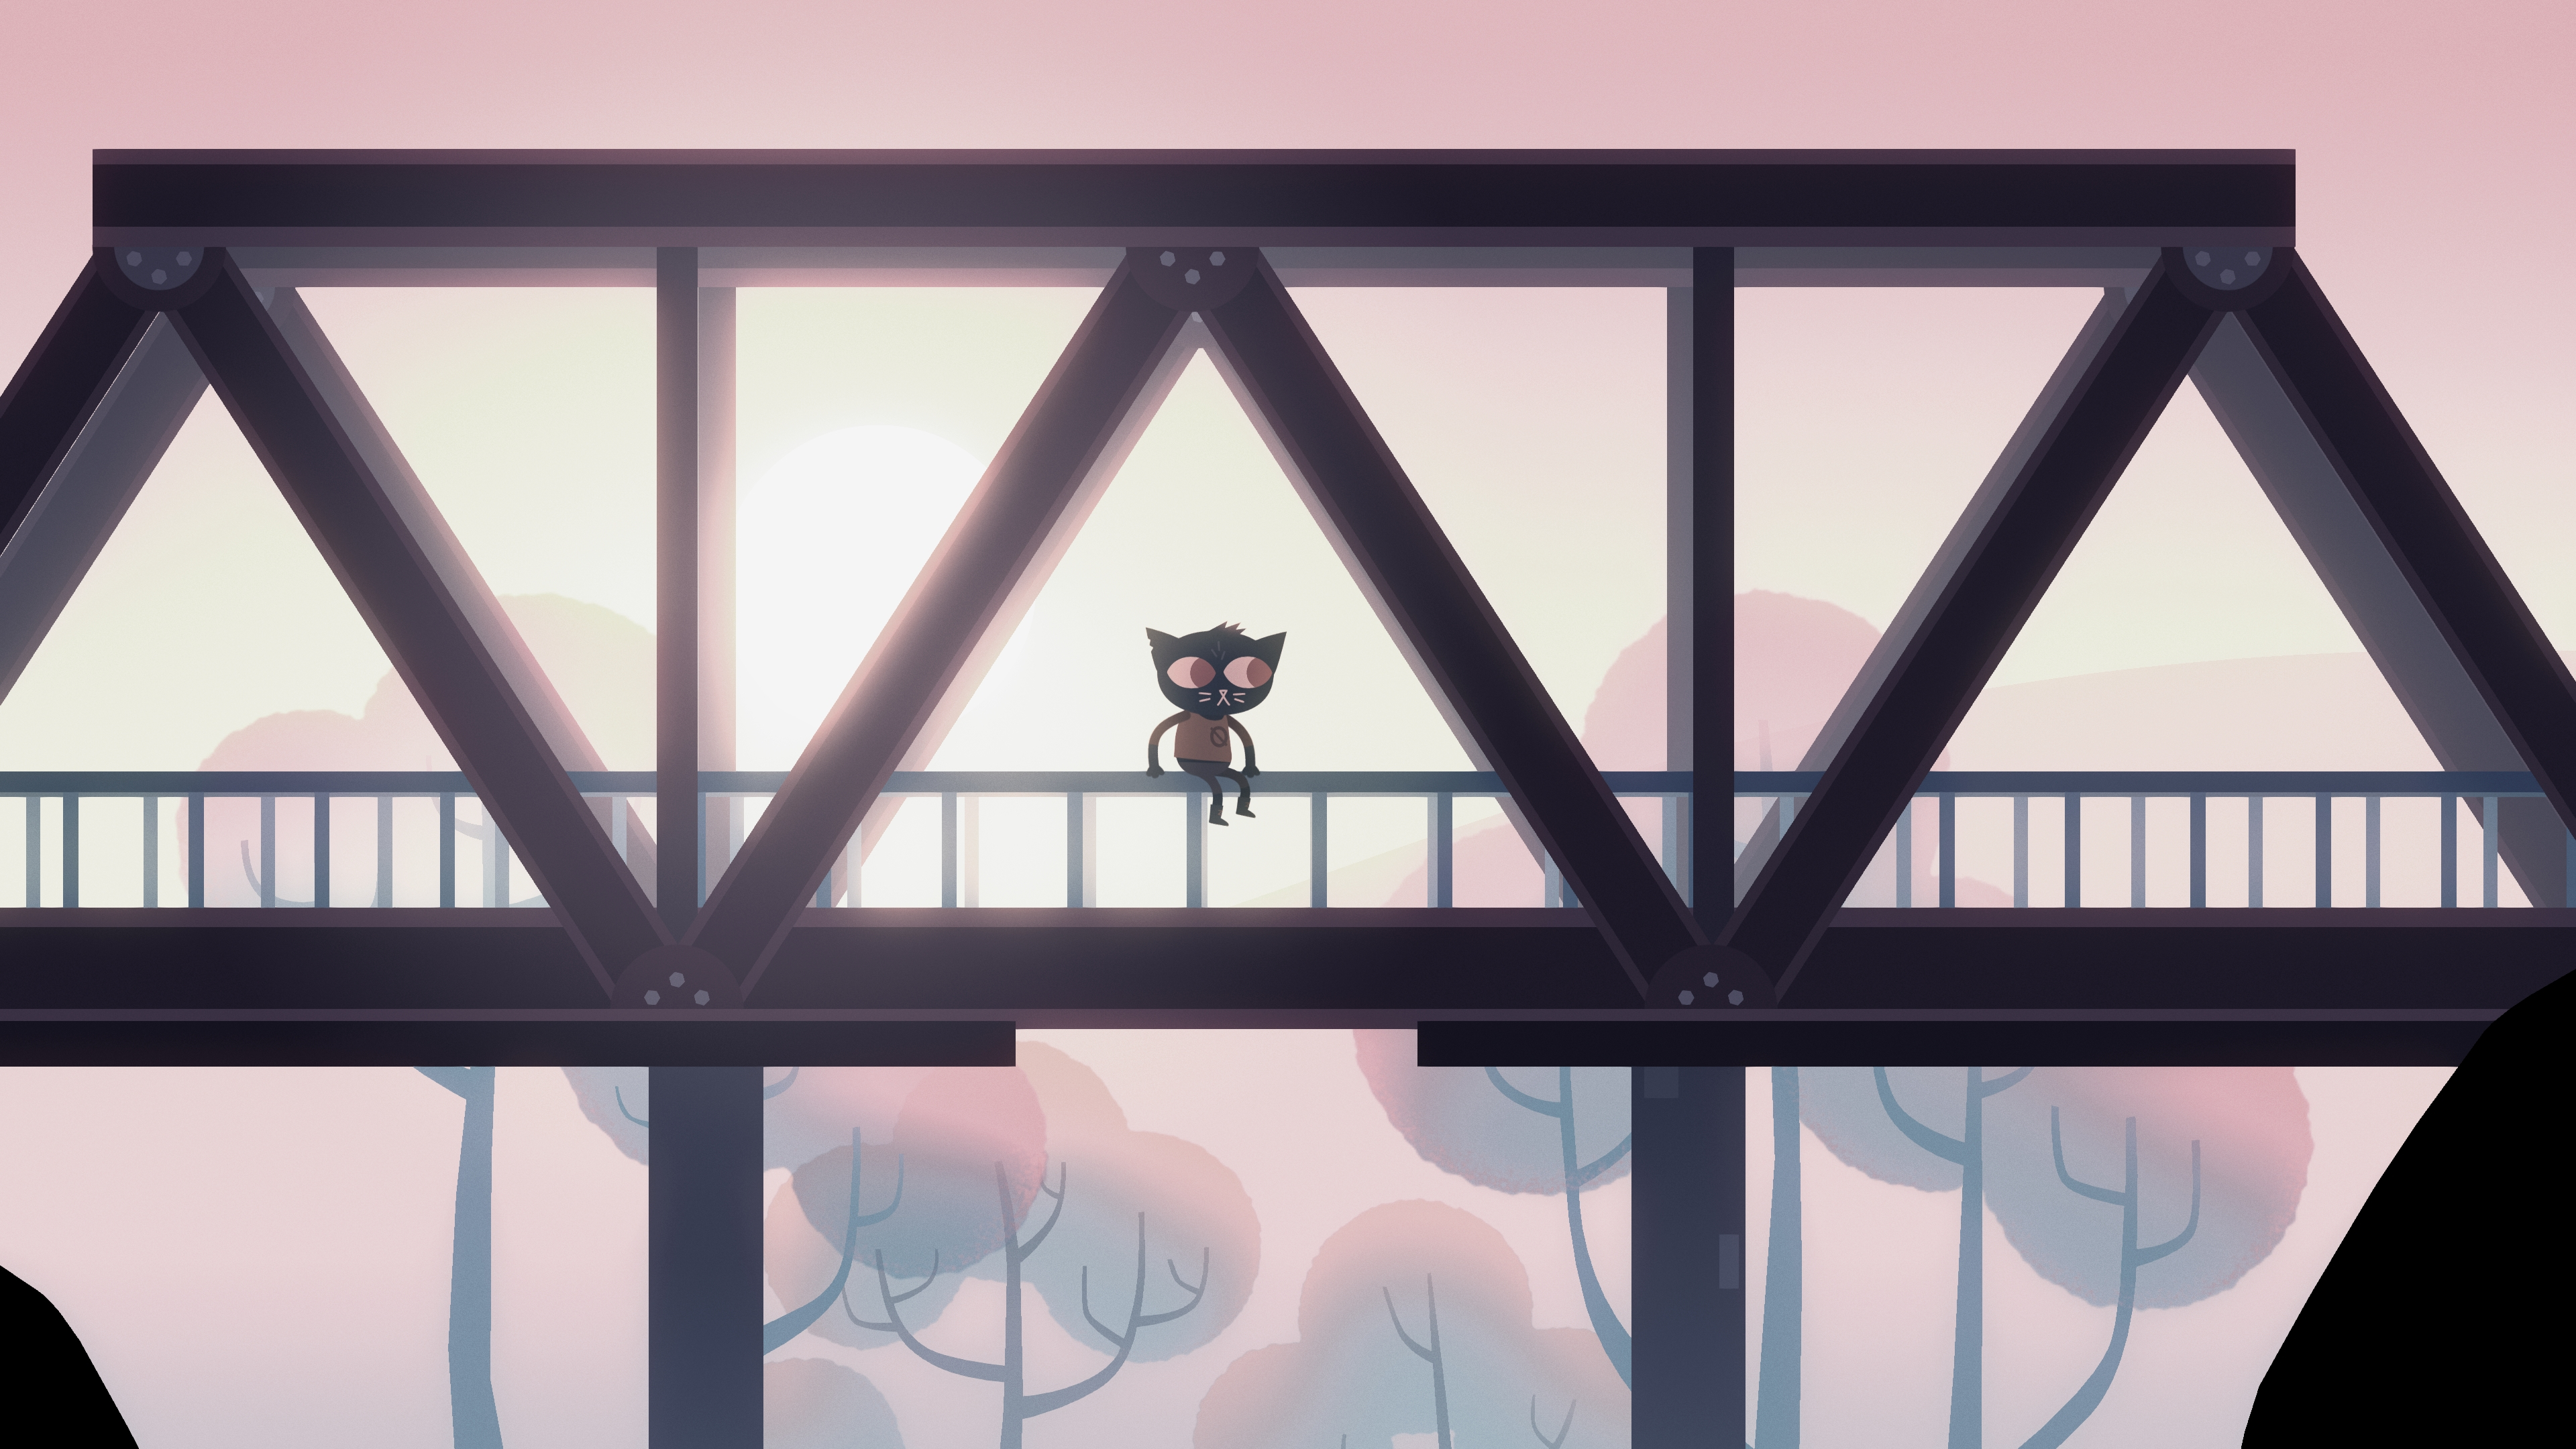 3840x2160 20+ Night in the Woods HD Wallpapers and Backgrounds